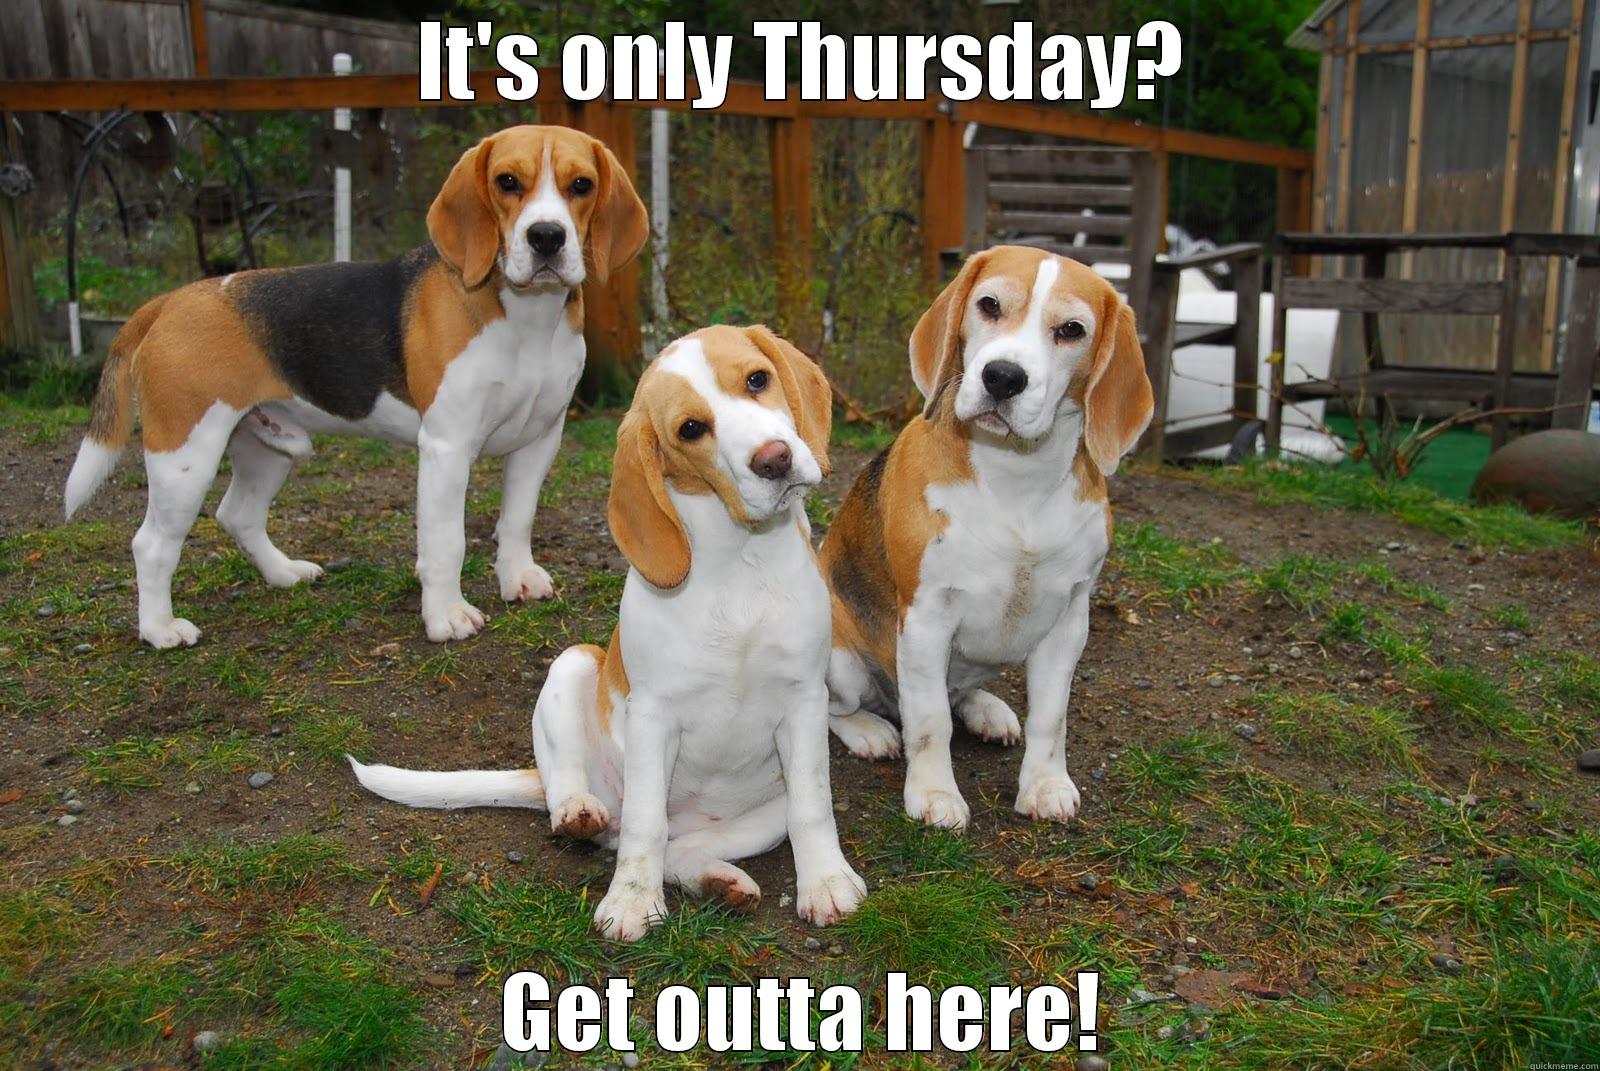  IT'S ONLY THURSDAY?   GET OUTTA HERE!  Misc